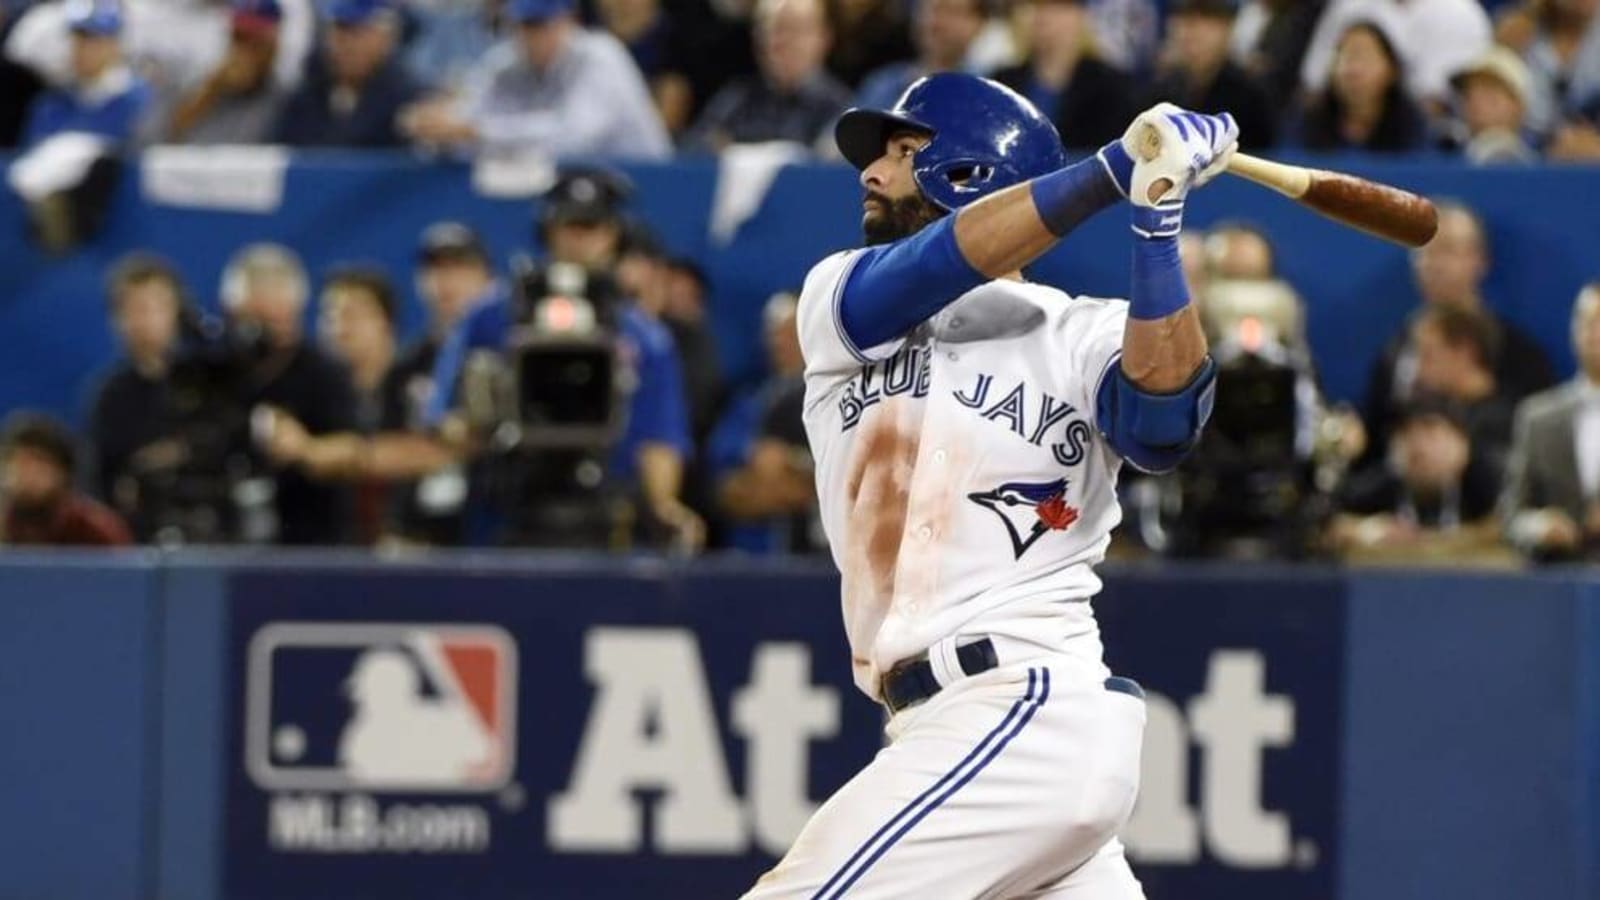 Toronto Blue Jays Will Give Out Jose Bautista Bat Flip Bobblehead in August